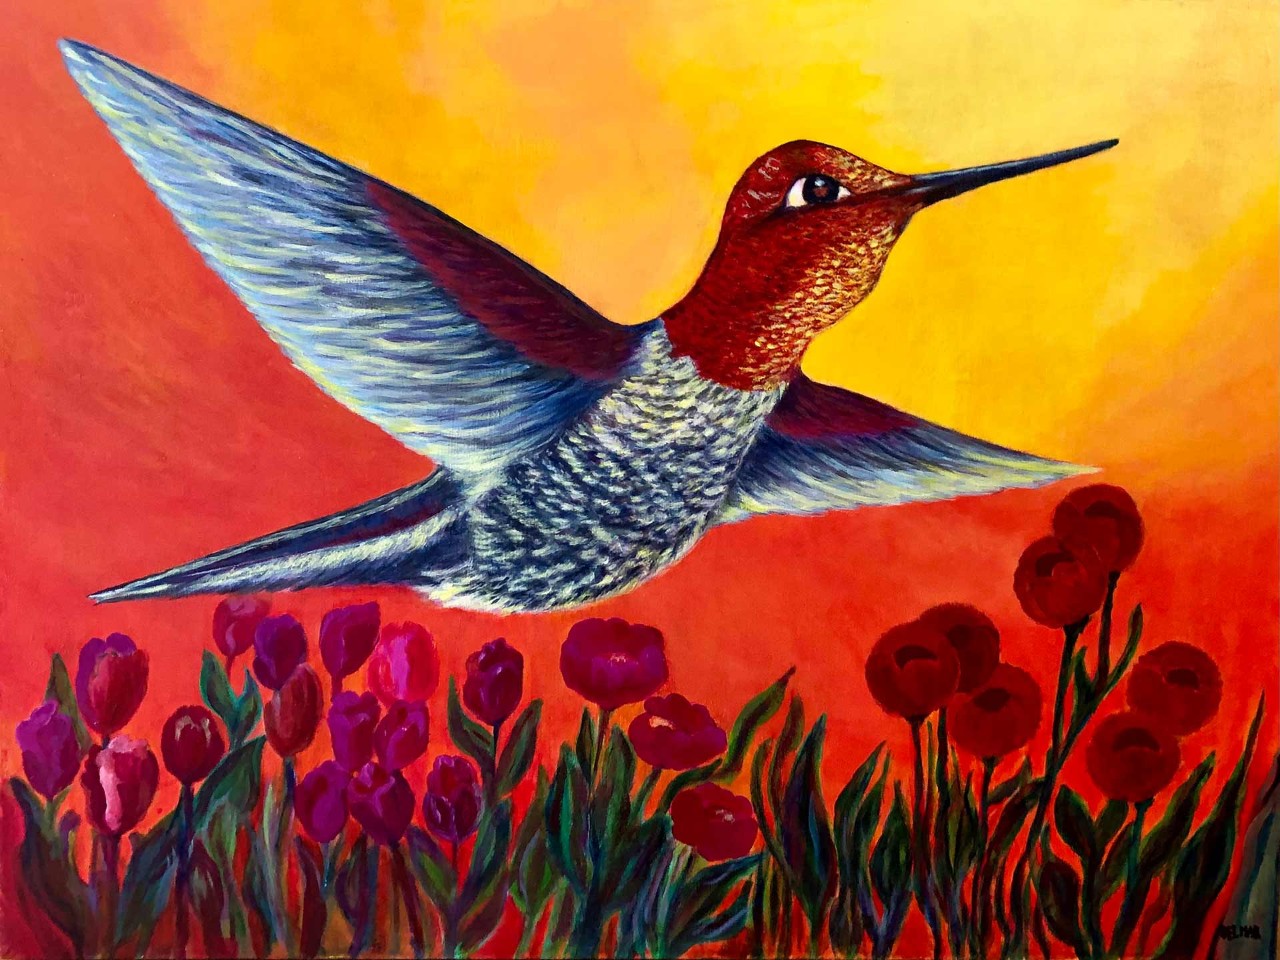 A hummingbird stretches its wings against a background that fades from yellow and orange at the top to red at the bottom